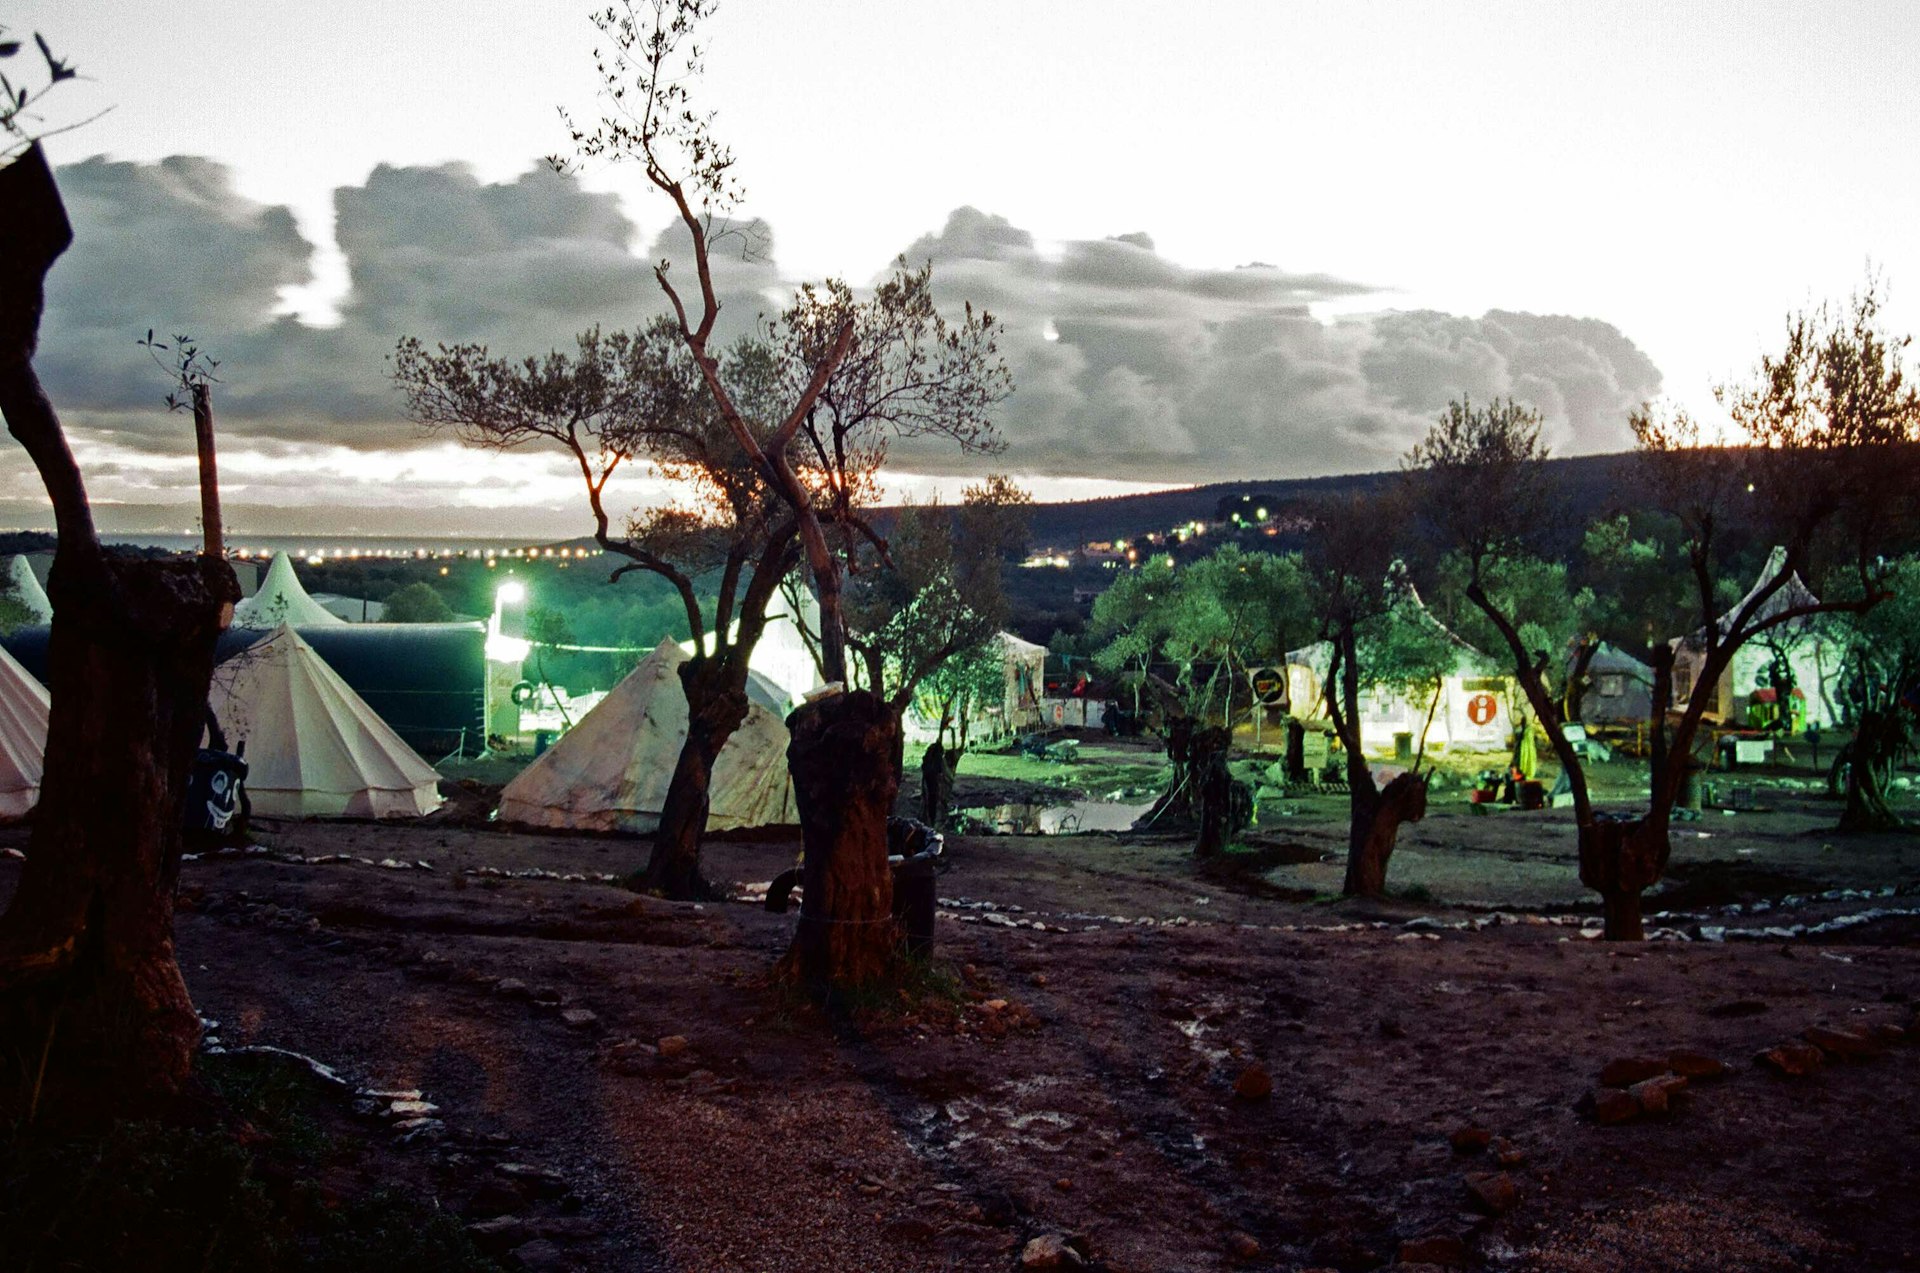 The Olive Grove unofficial camp. Photo by Bailey Tom Bailey